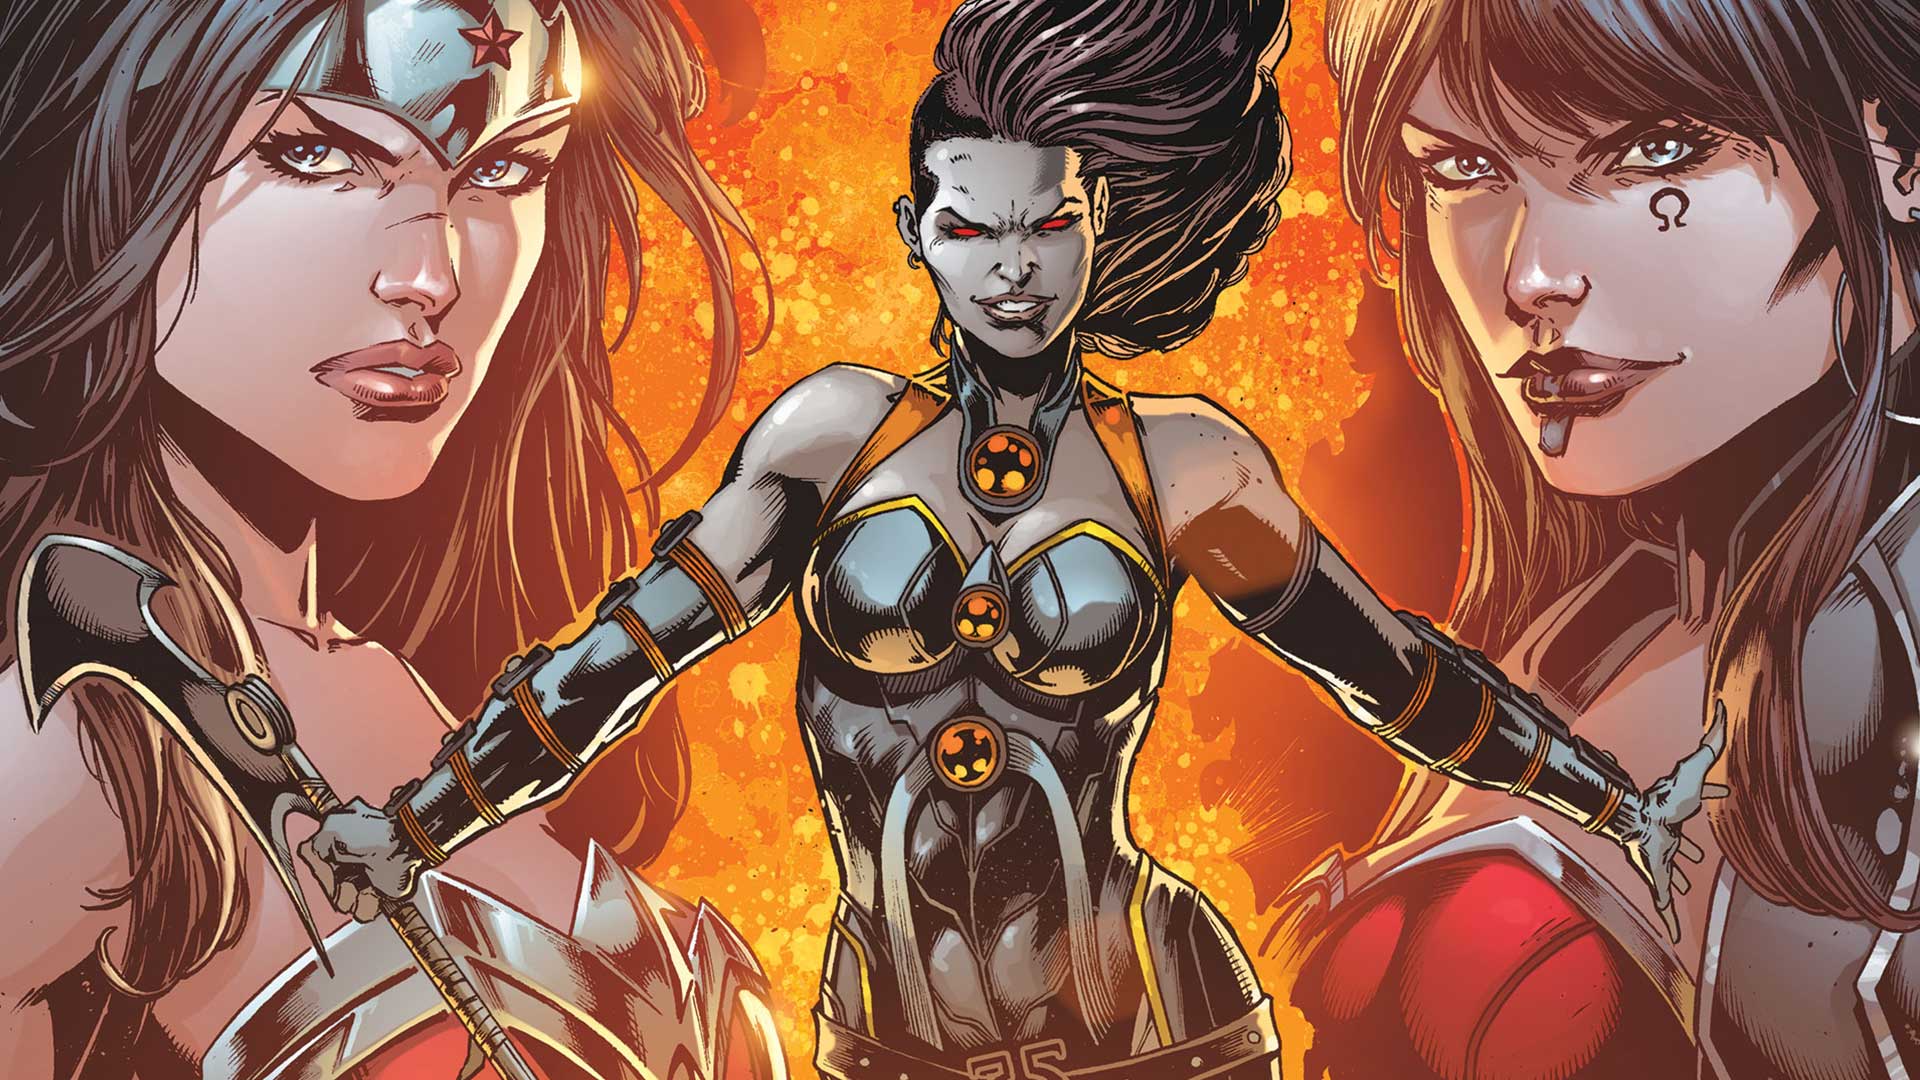 Grail Daughter Of Darksied Fights the Justice League